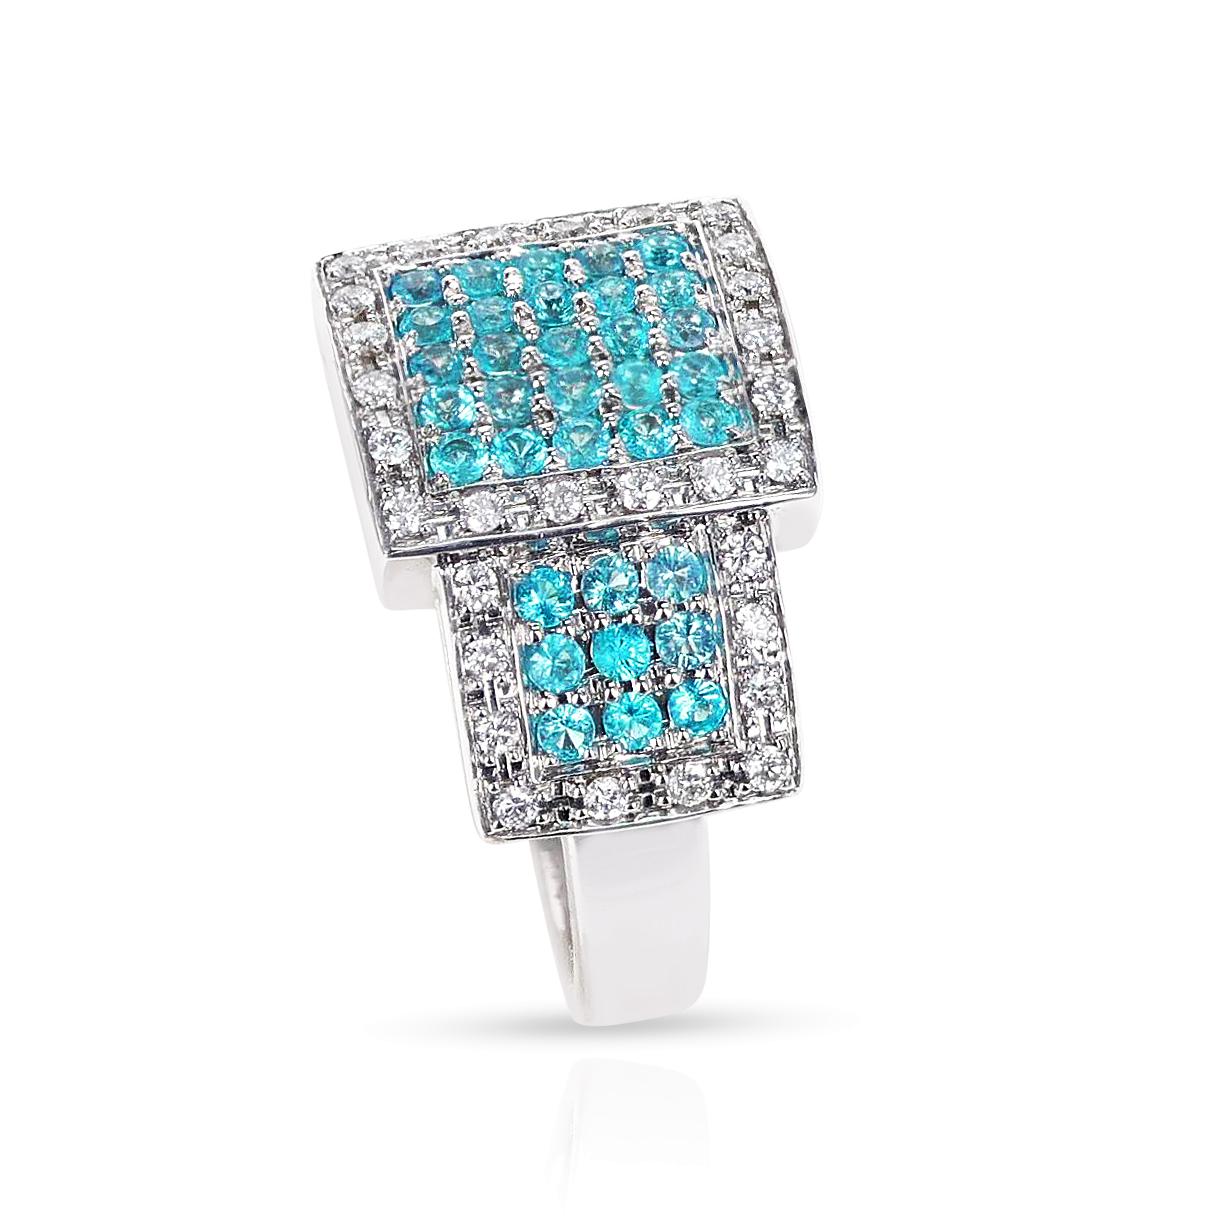 Three Square Cocktail Brazilian Paraiba Tourmaline and Diamond Ring, 18k In Excellent Condition For Sale In New York, NY